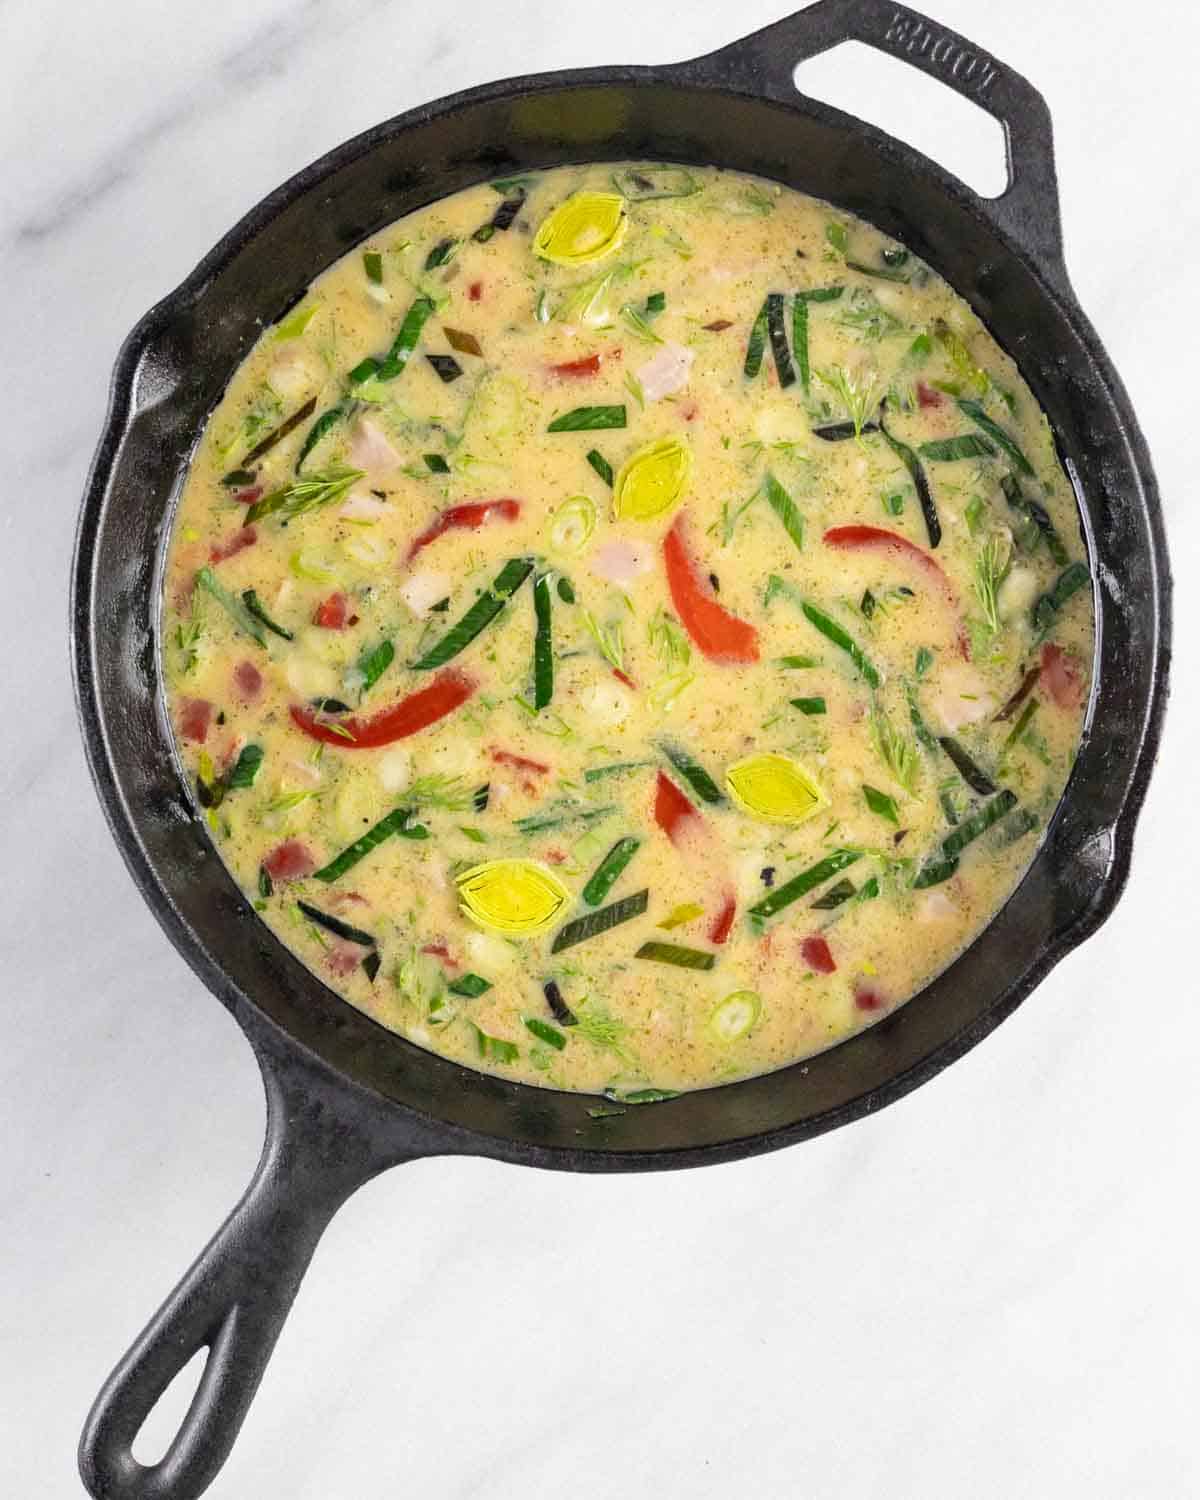 Dairy-free Frittata ingredine mixture poured into a cast iron skillet ready to bake.